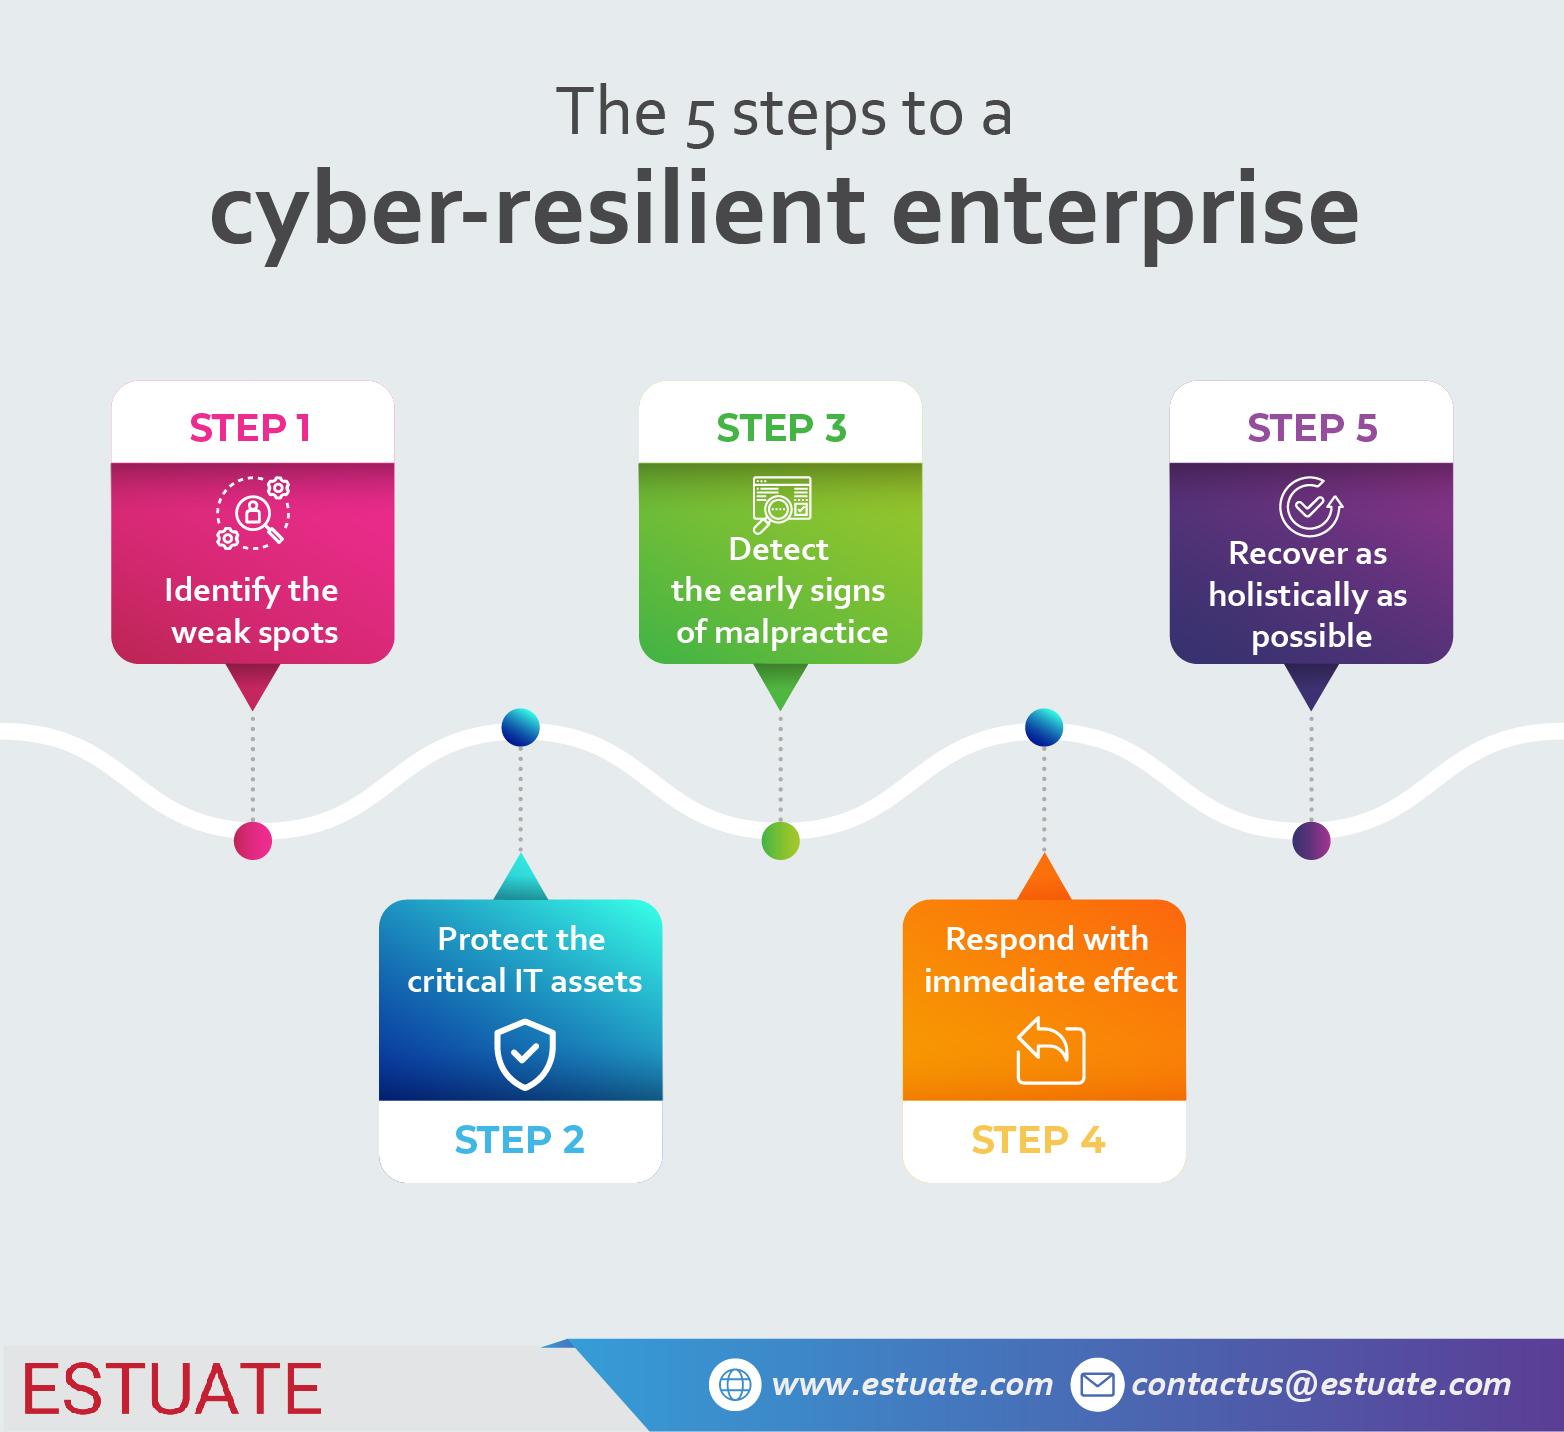 The 5 steps to a cyber-resilient enterprise